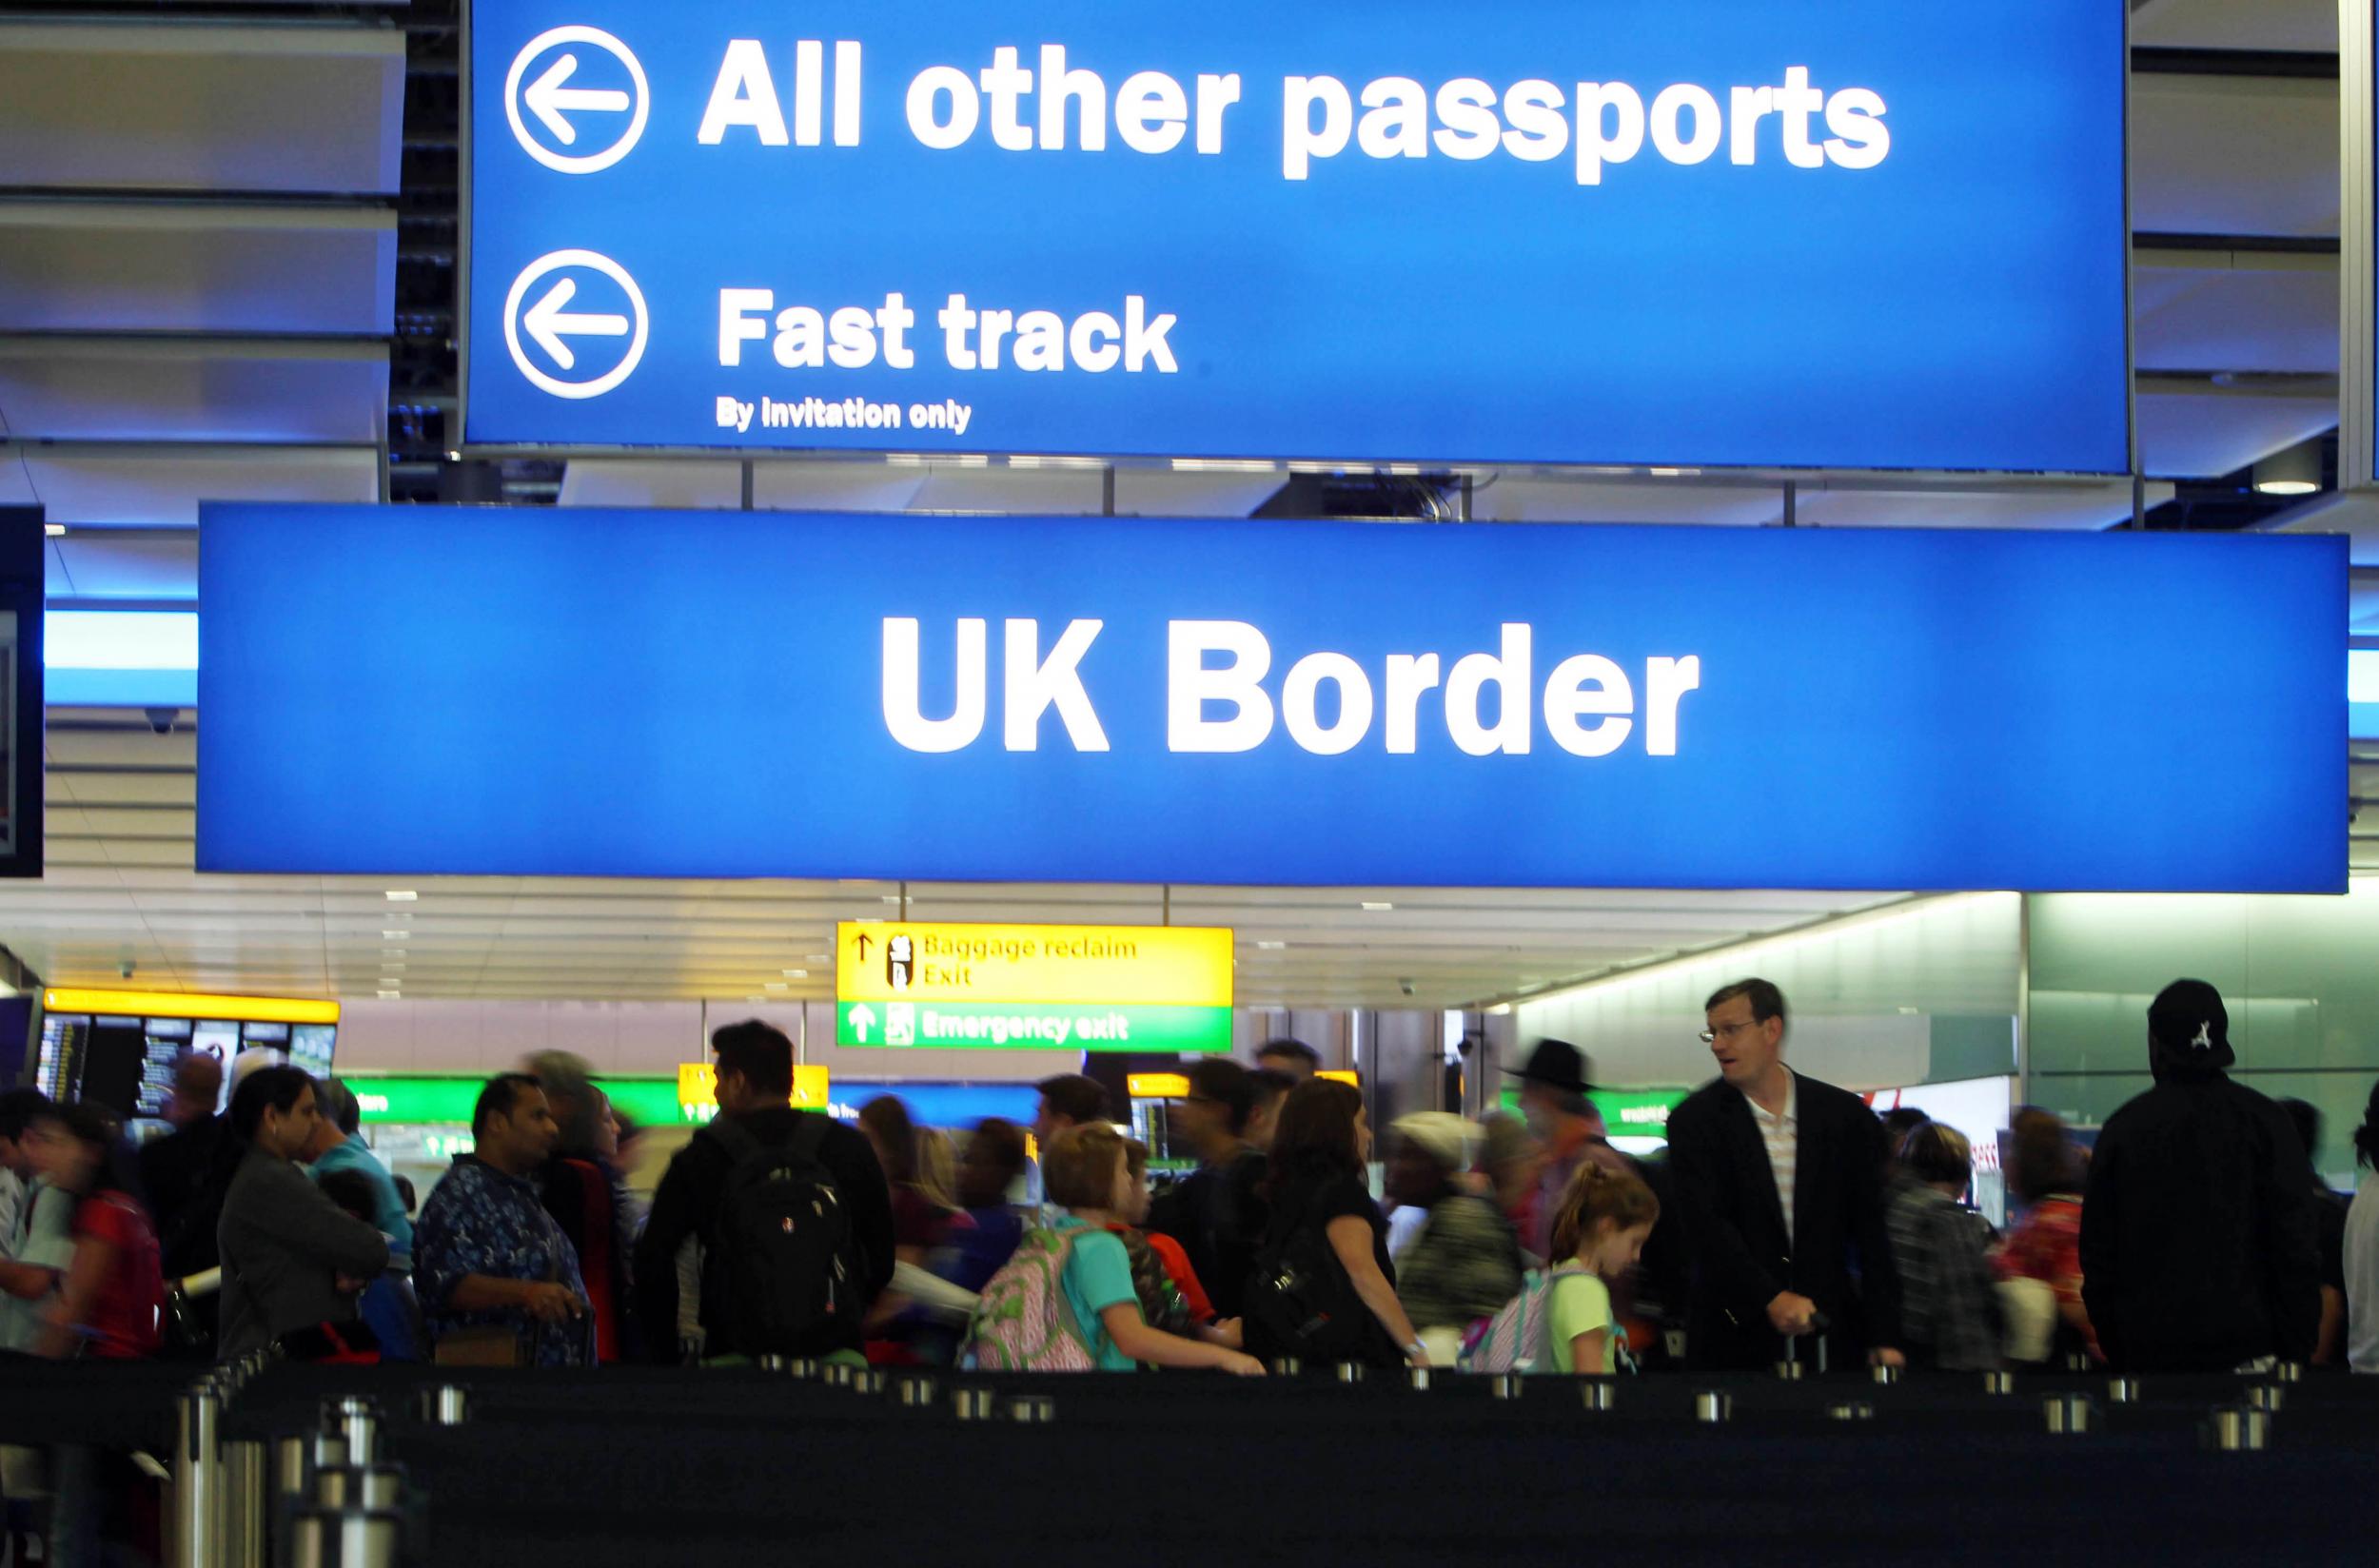 The report also demands better criminal and security checks at borders